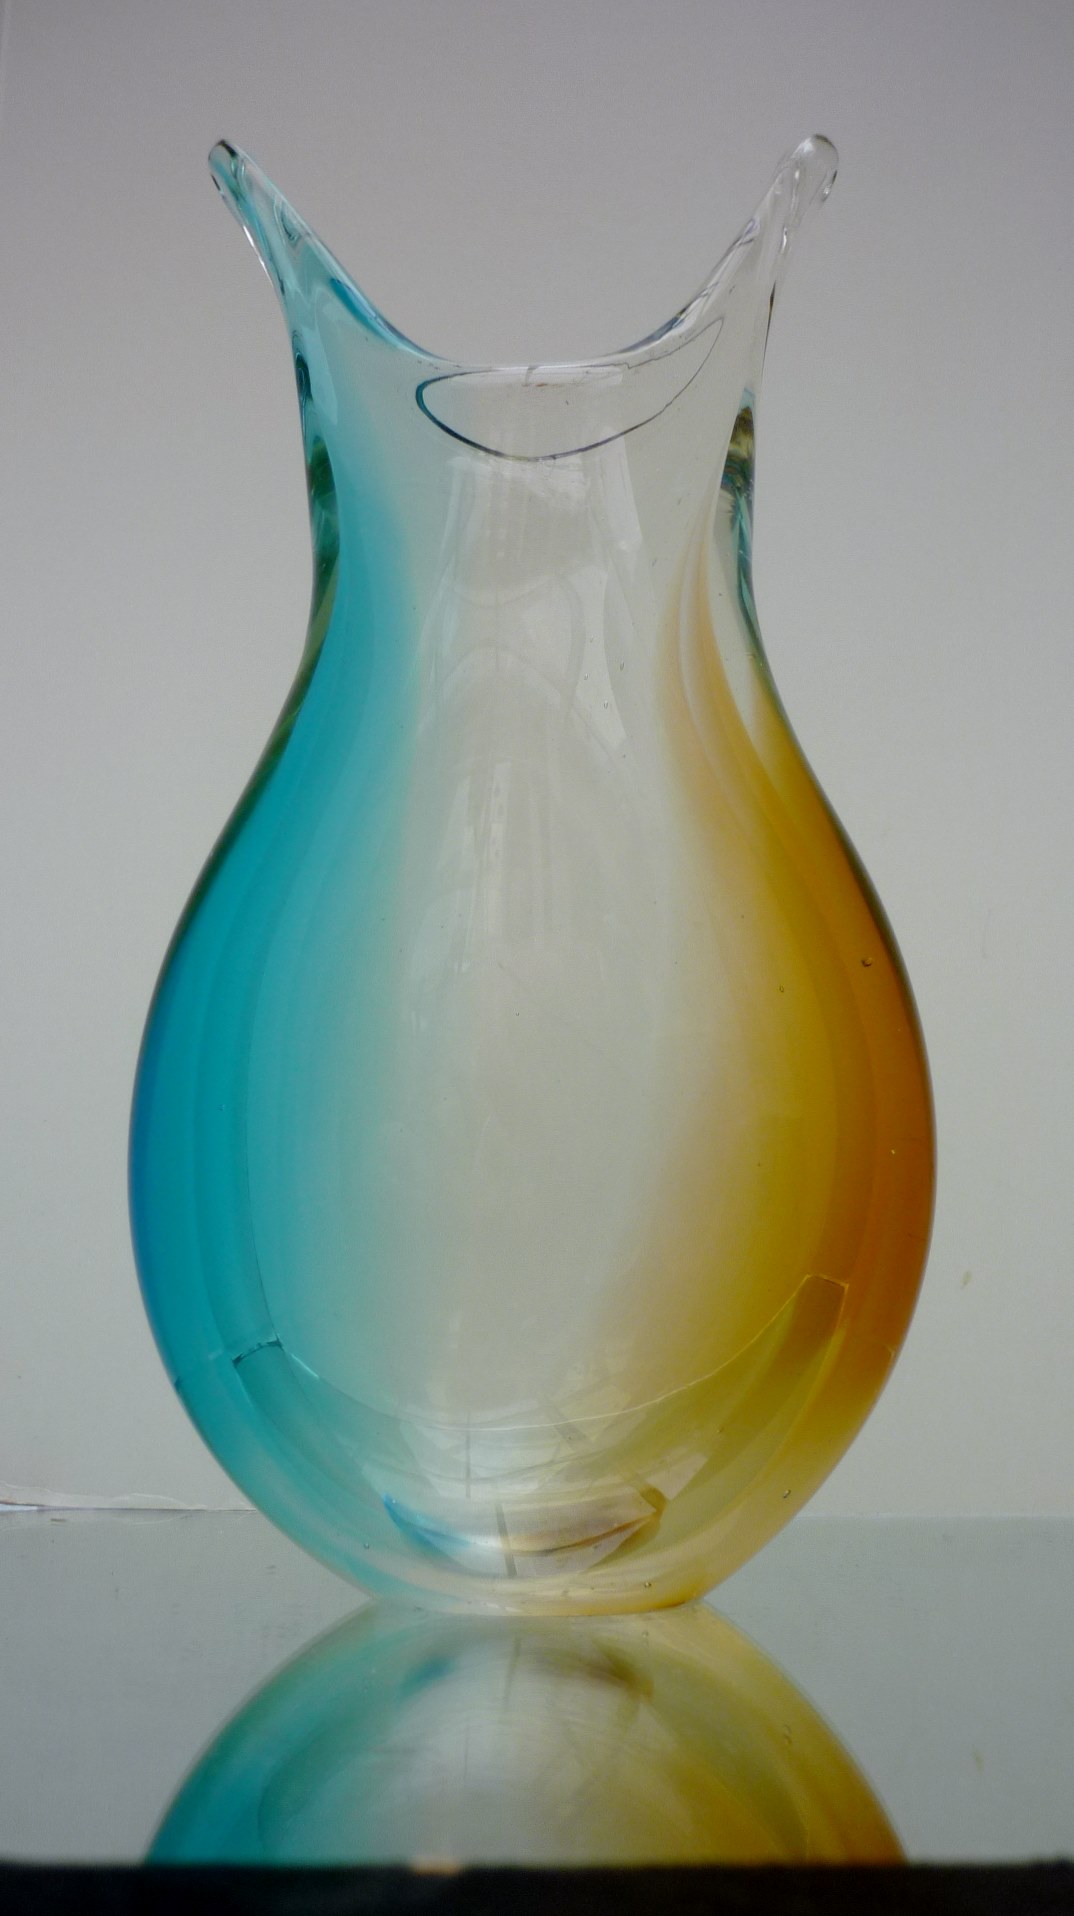 A stunning piece of Murano Glass made in the style of Flavio Polis’ sommerso glassware. 